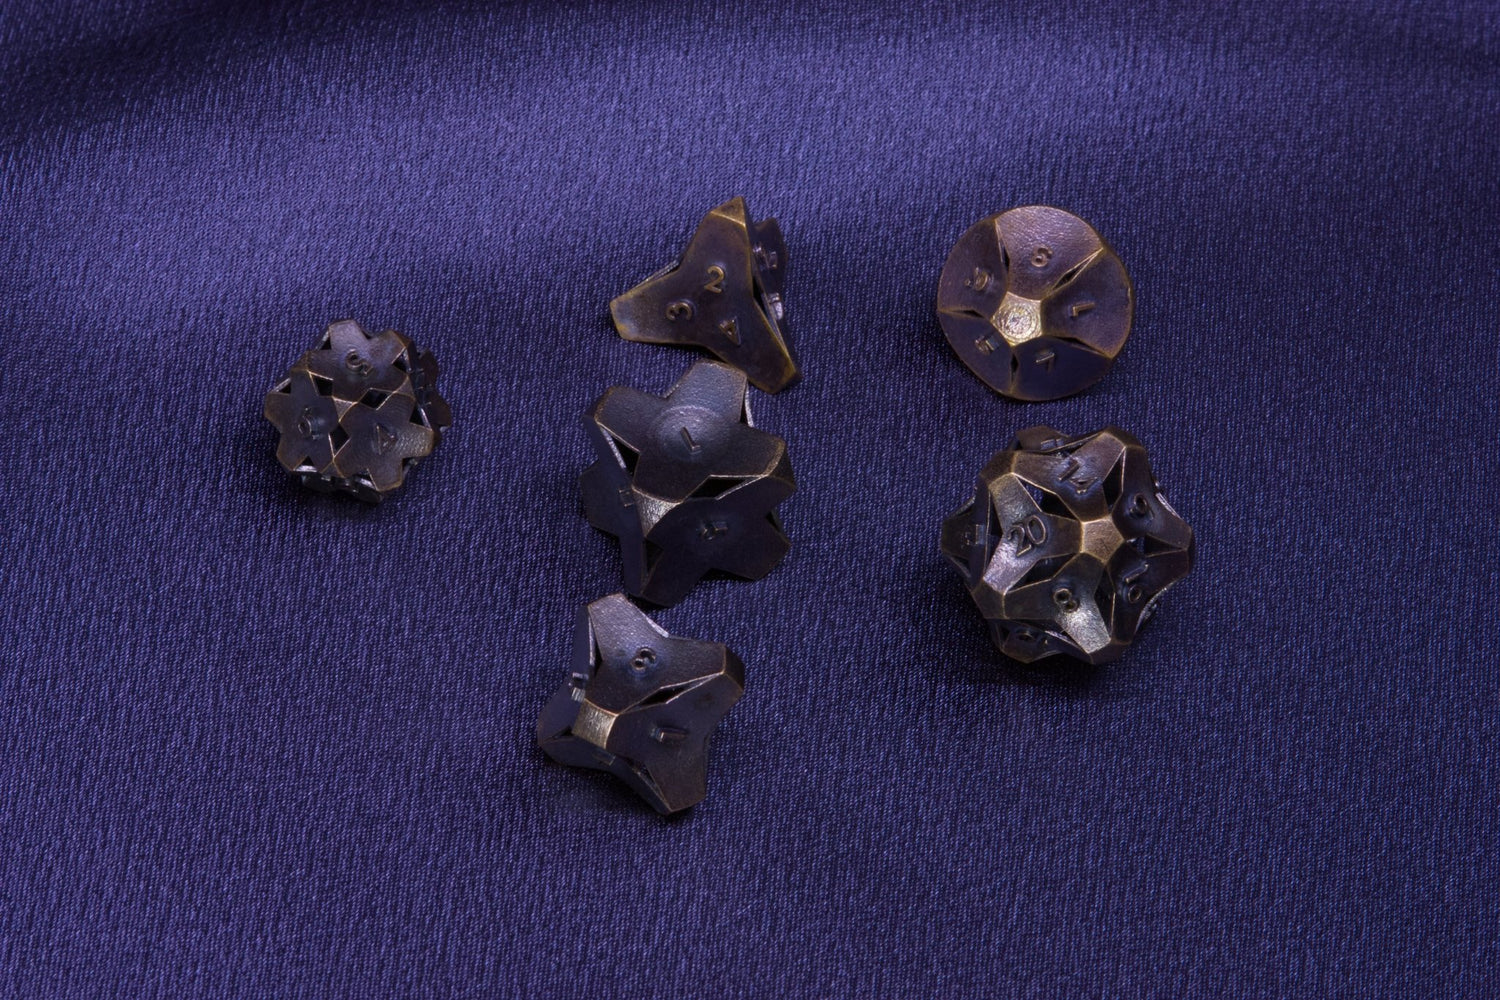 Understated: Polyhedral Dice Set - Summit Dice